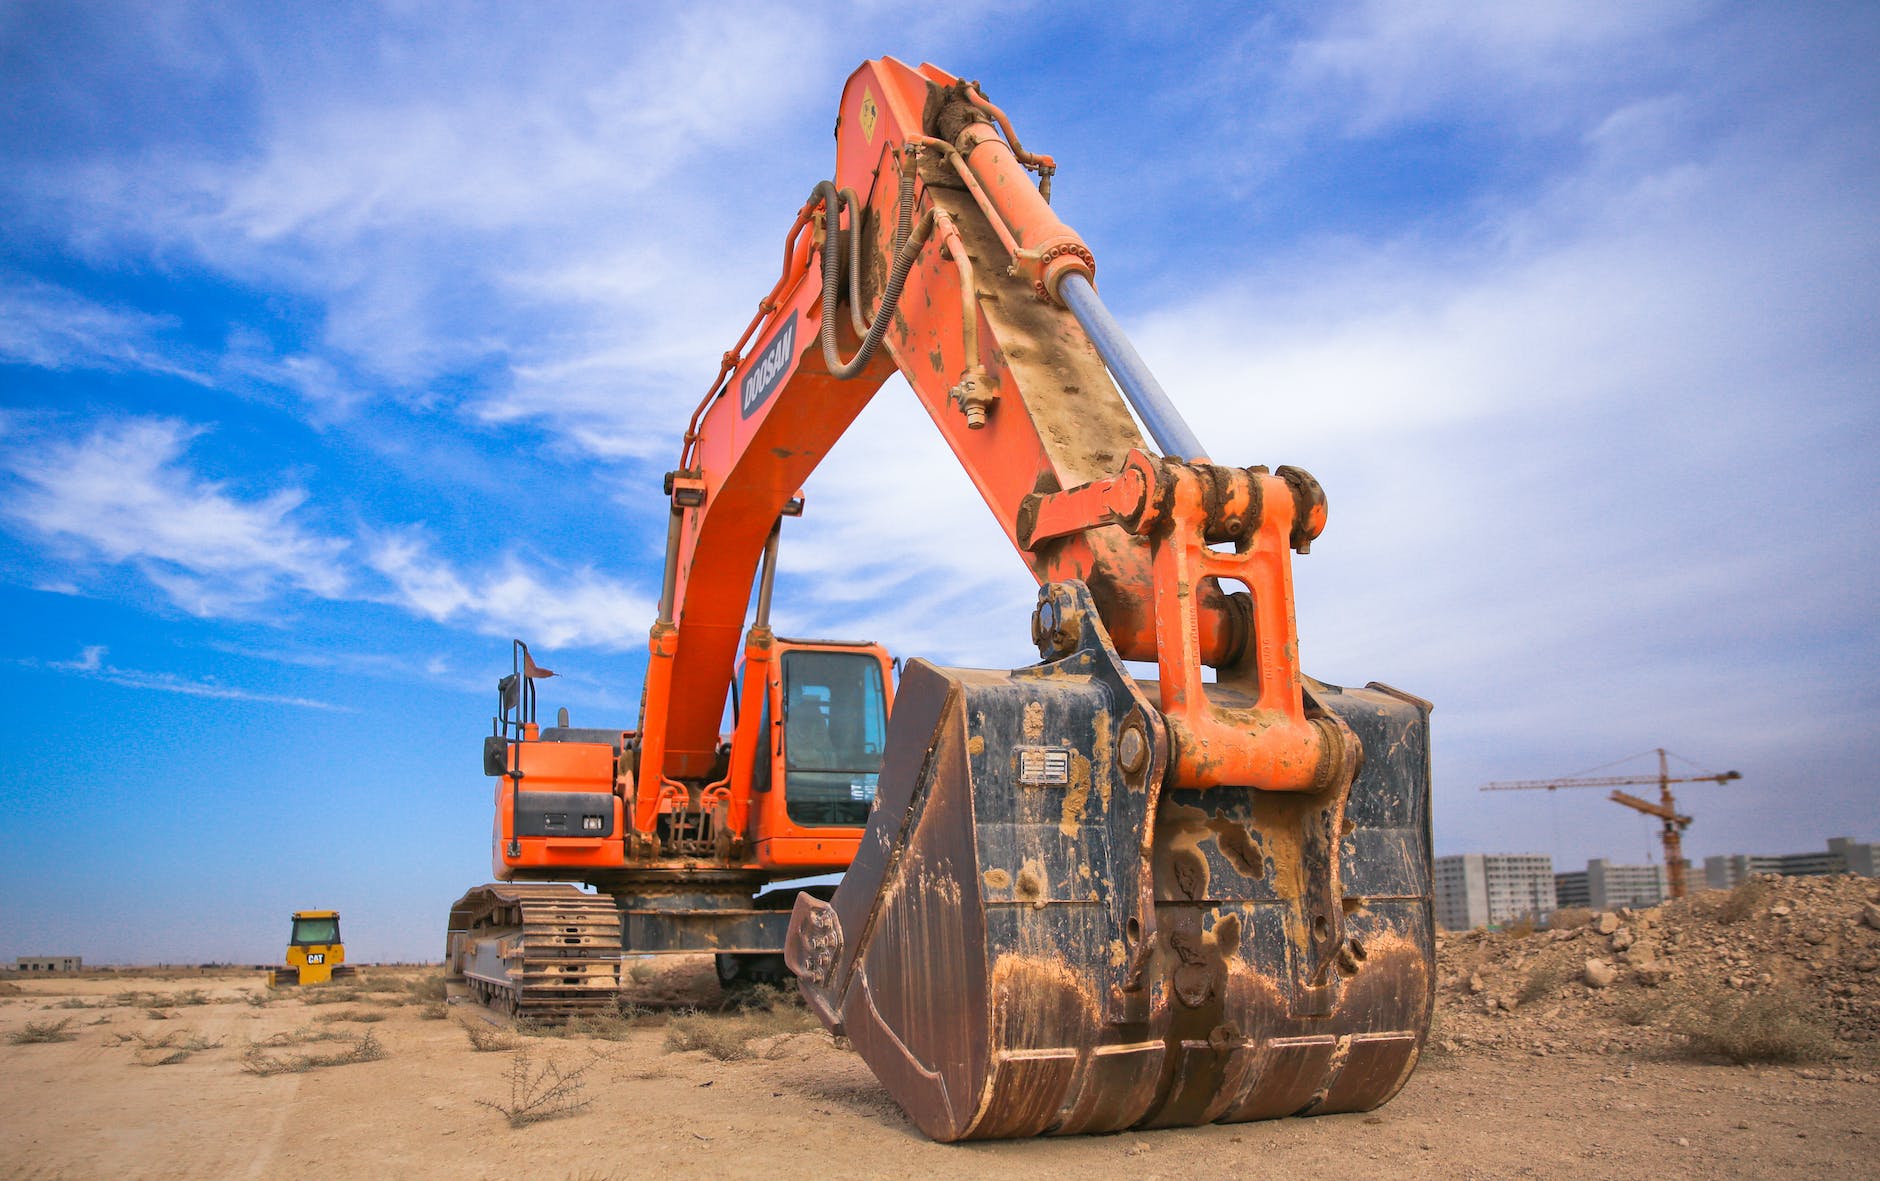 low angle photography of orange excavator under white clouds, county auction